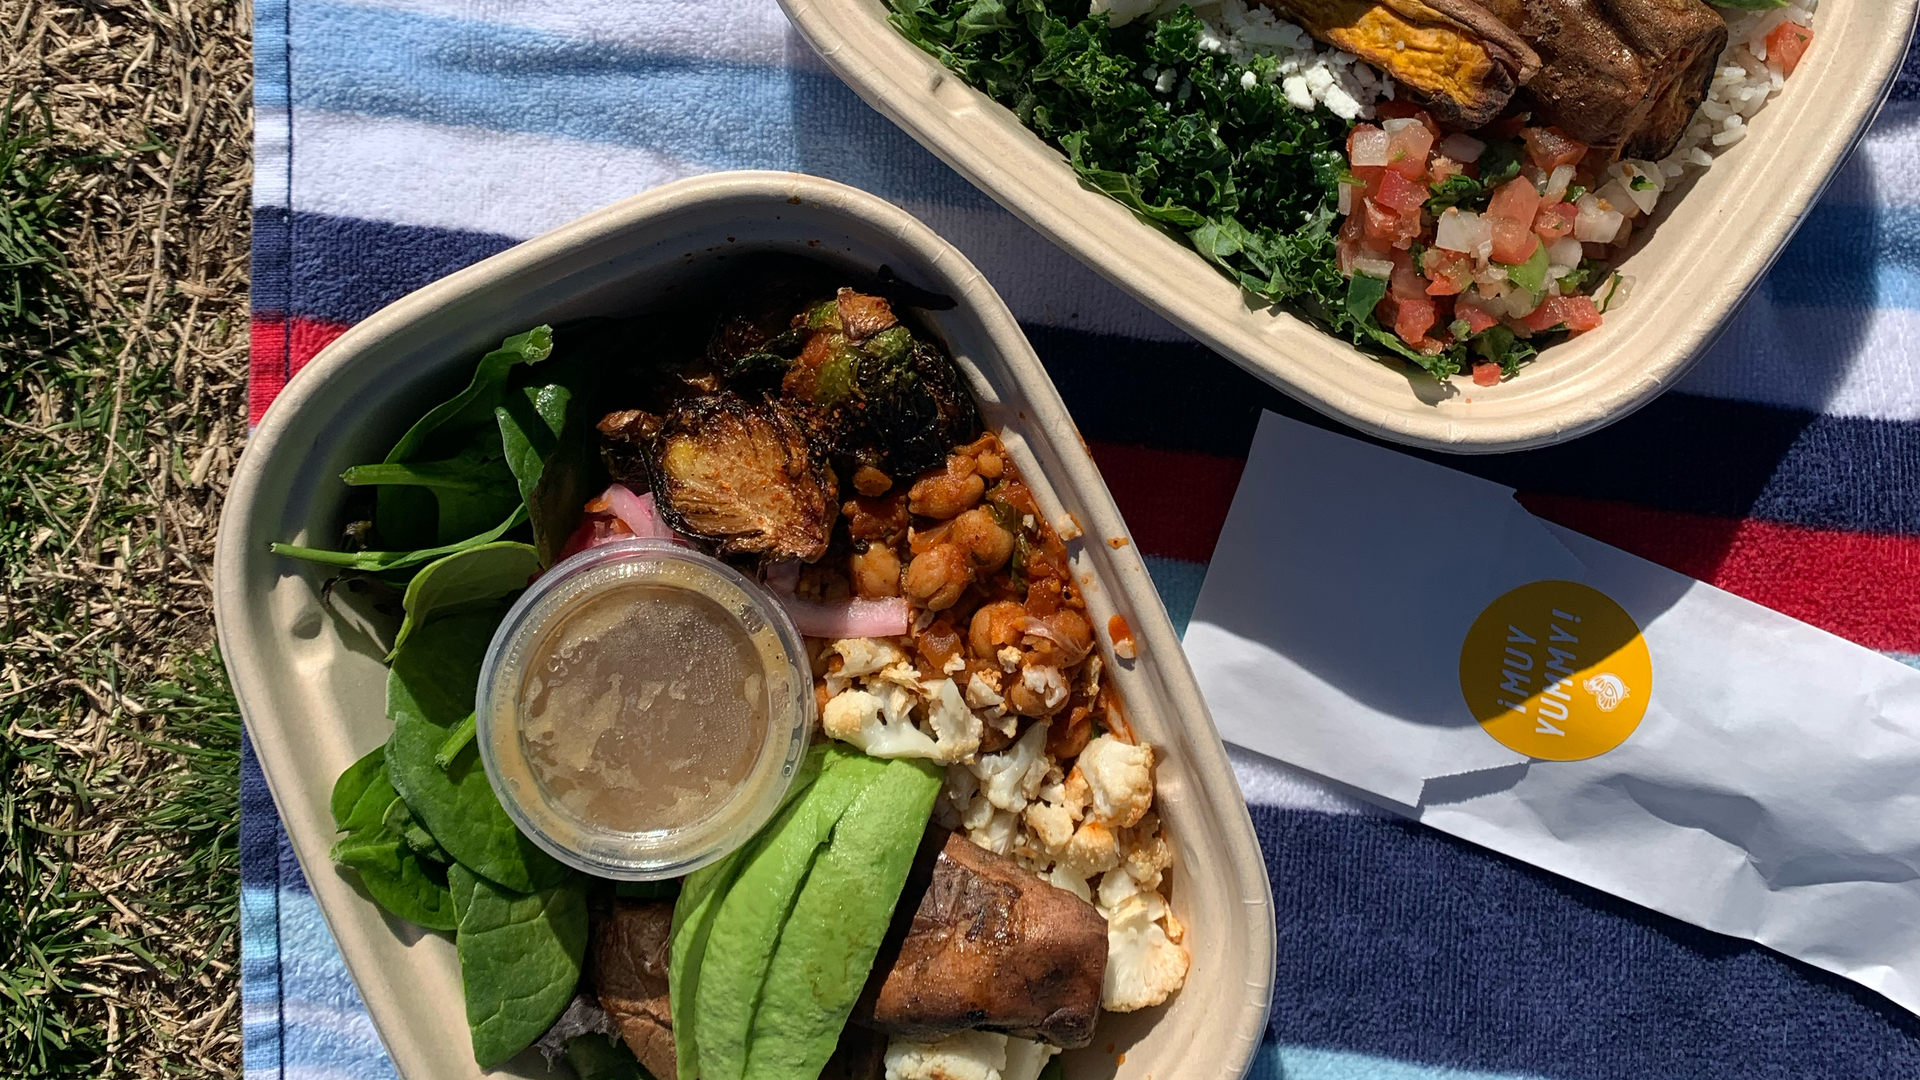 Two to-go containers on a picnic blanket